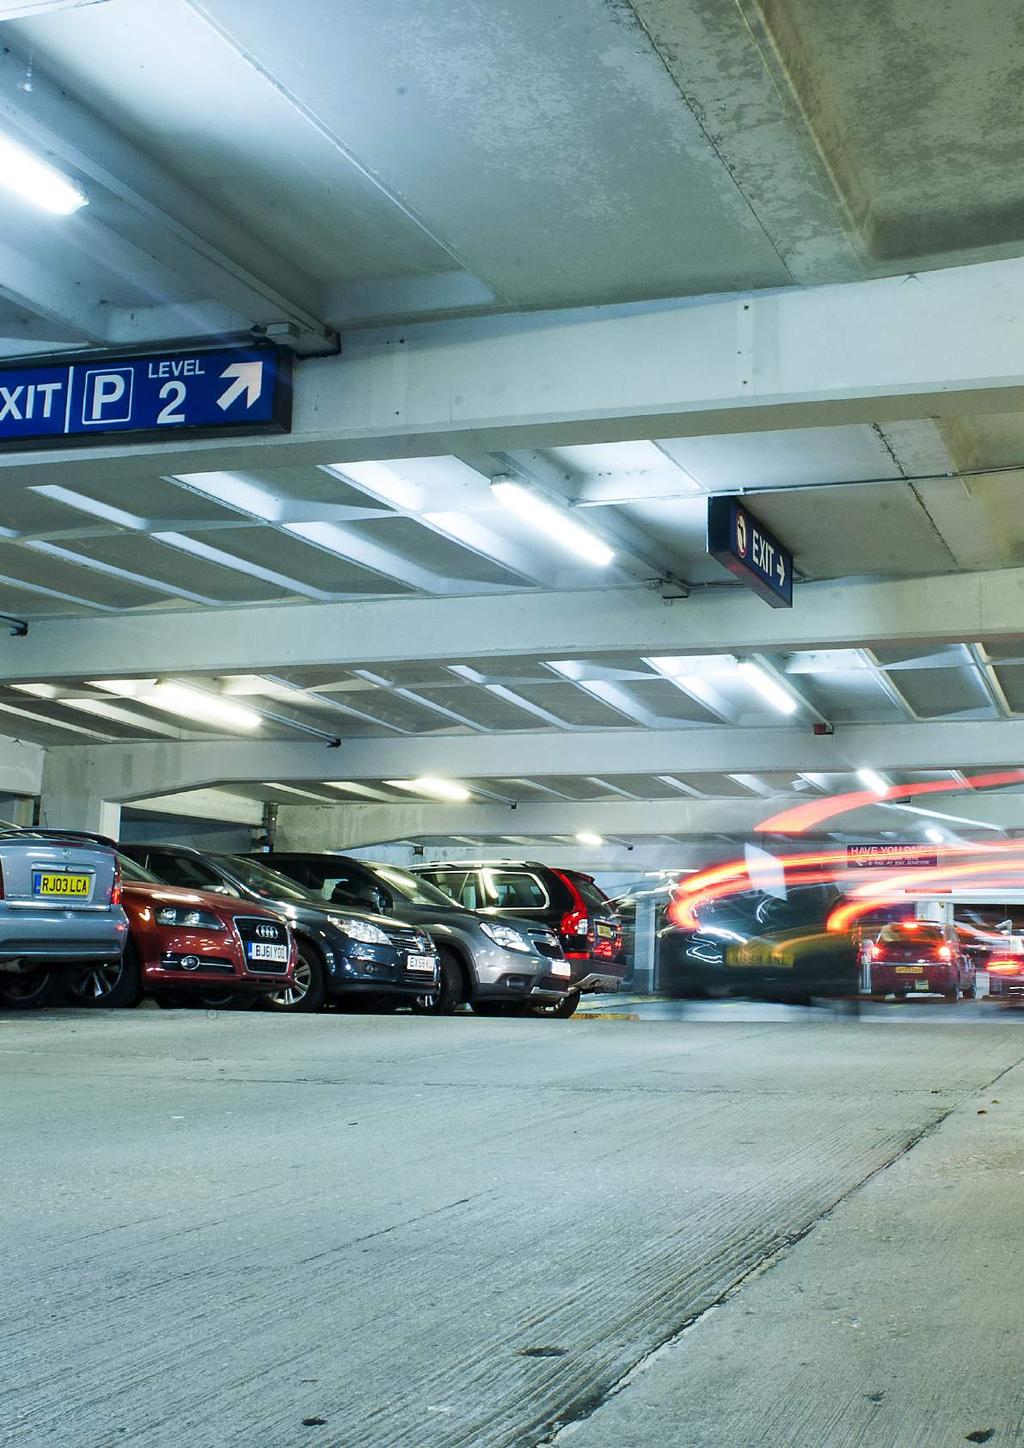 At NCP, we recently conducted research amongst 2,000 consumers and found that the biggest concern about car parks was that it d be too busy and they wouldn t be able to find space.